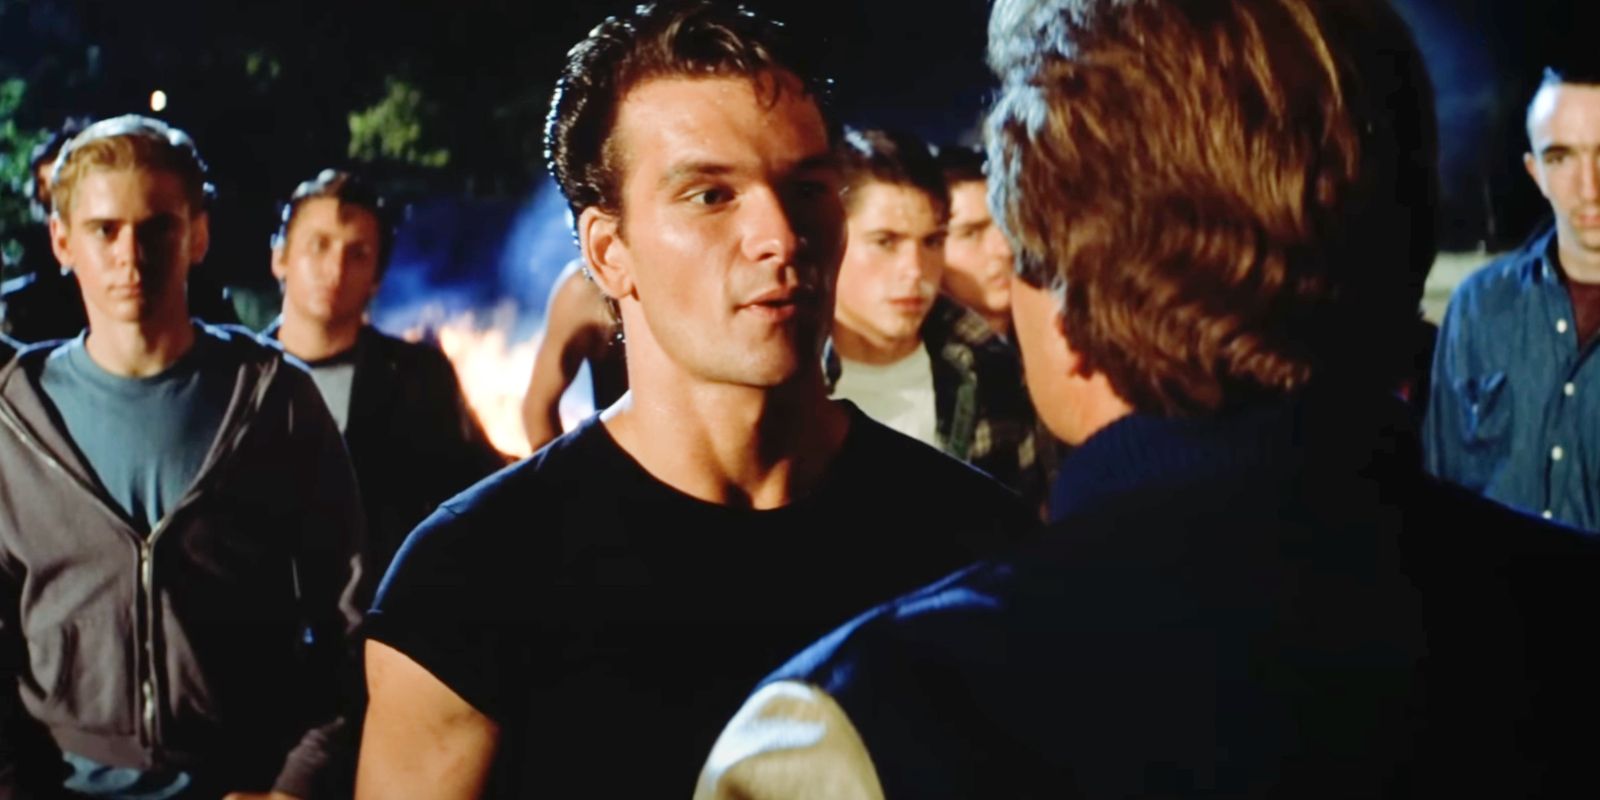 Darry standing up to the Socs in The Outsiders